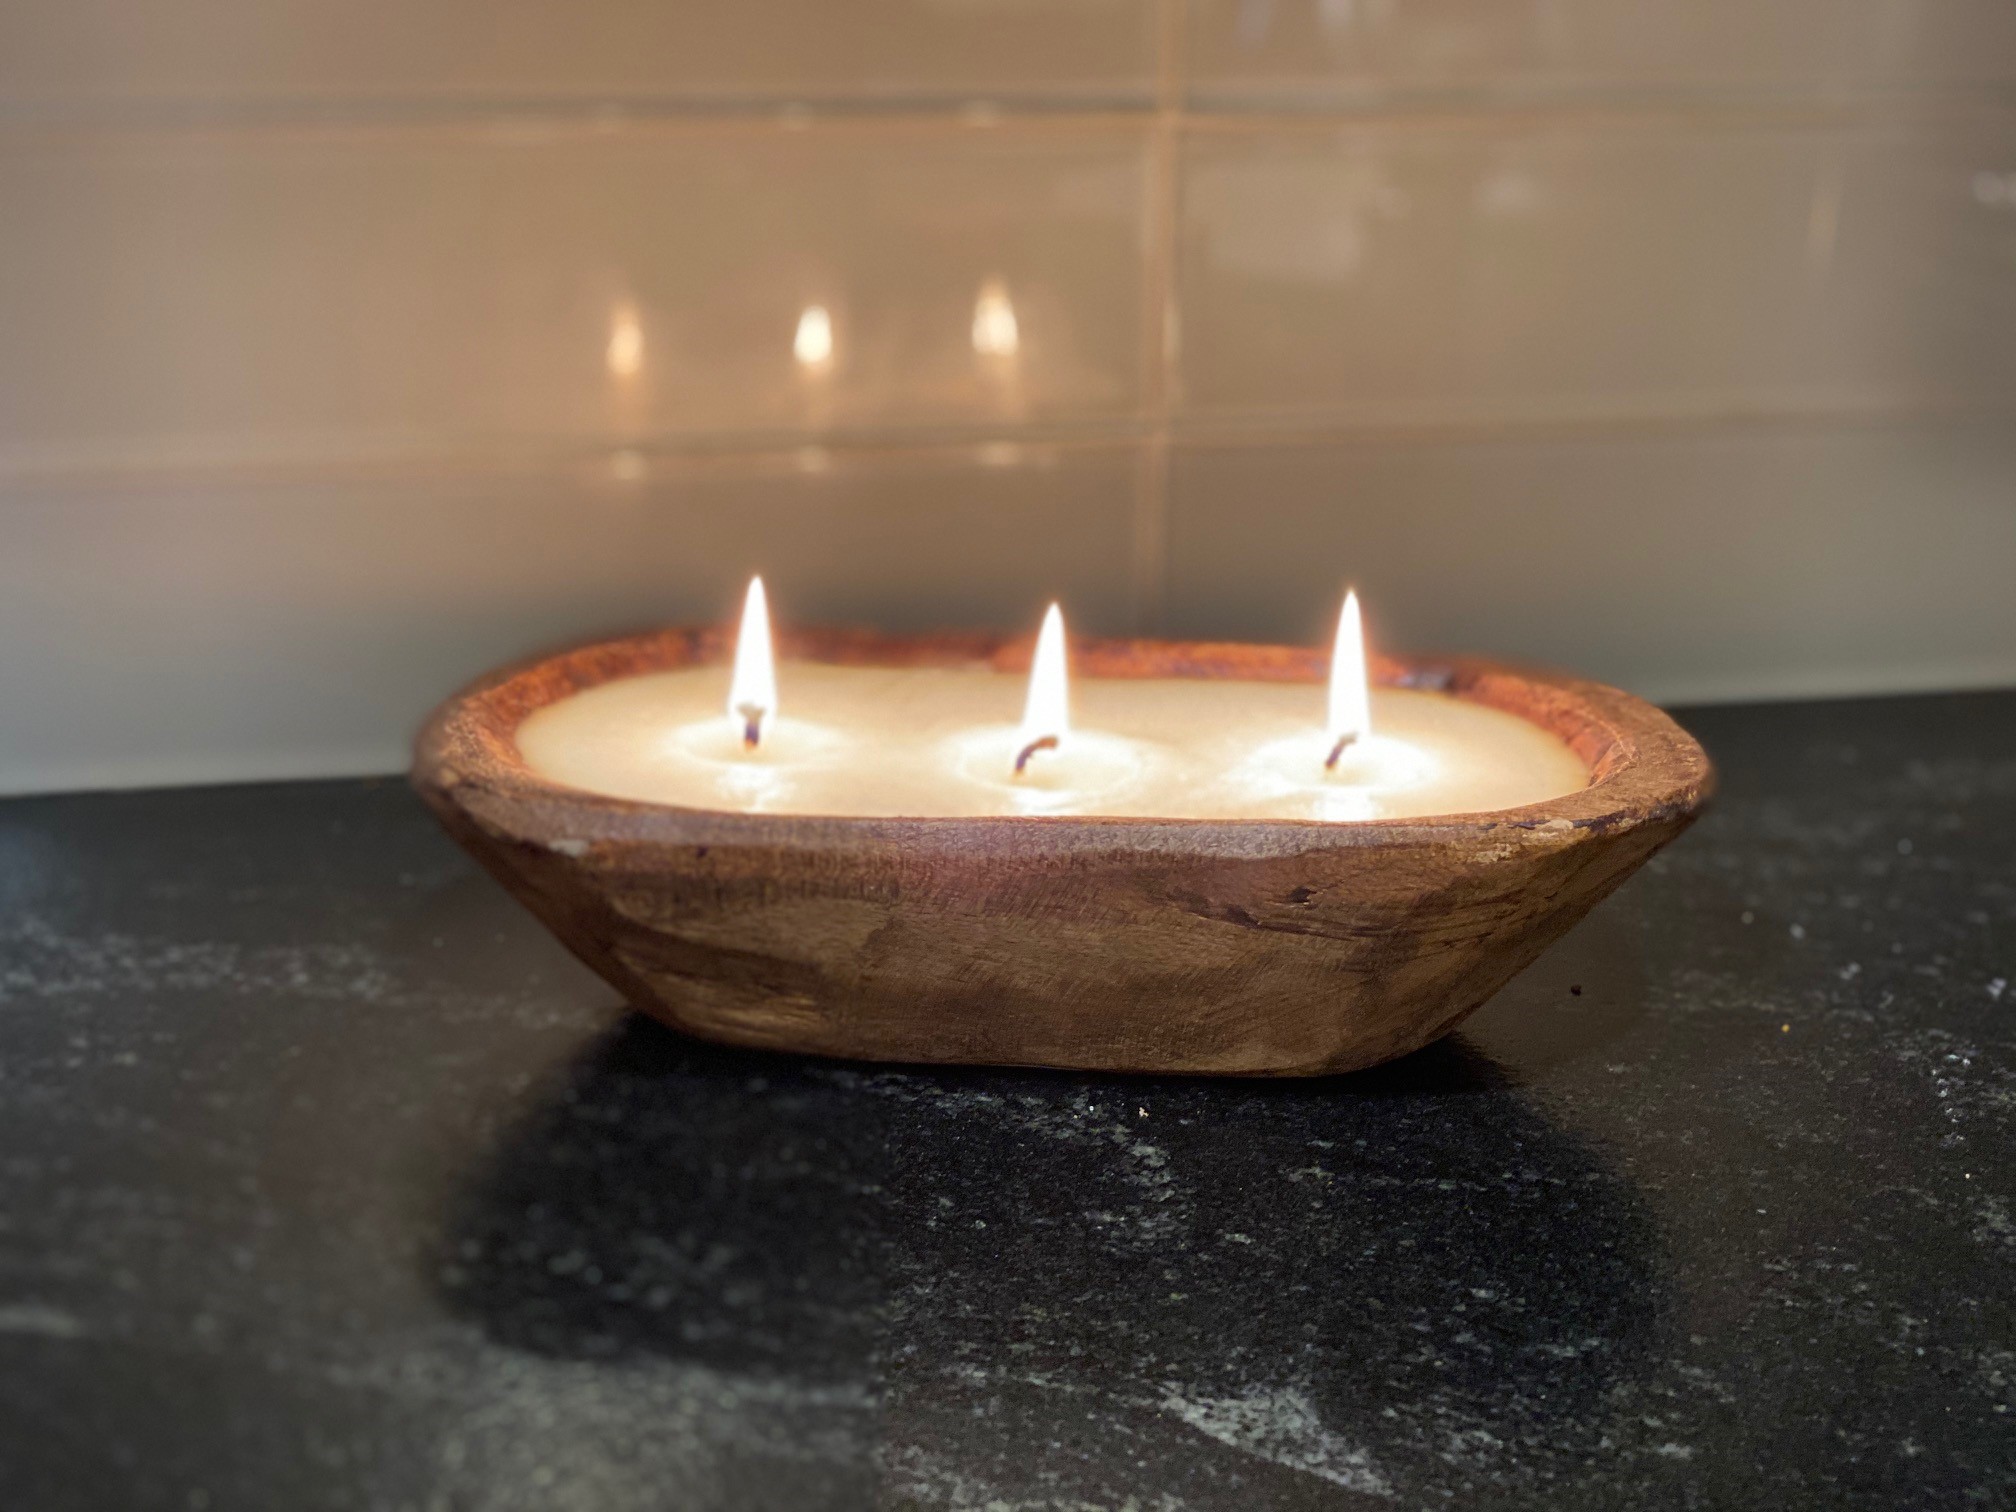 Dough Bowl Candle- Citrus Maitai Wood Bowl Candle Handmade Lux Candles The Quotes Candles Natural Soy Wax Candle